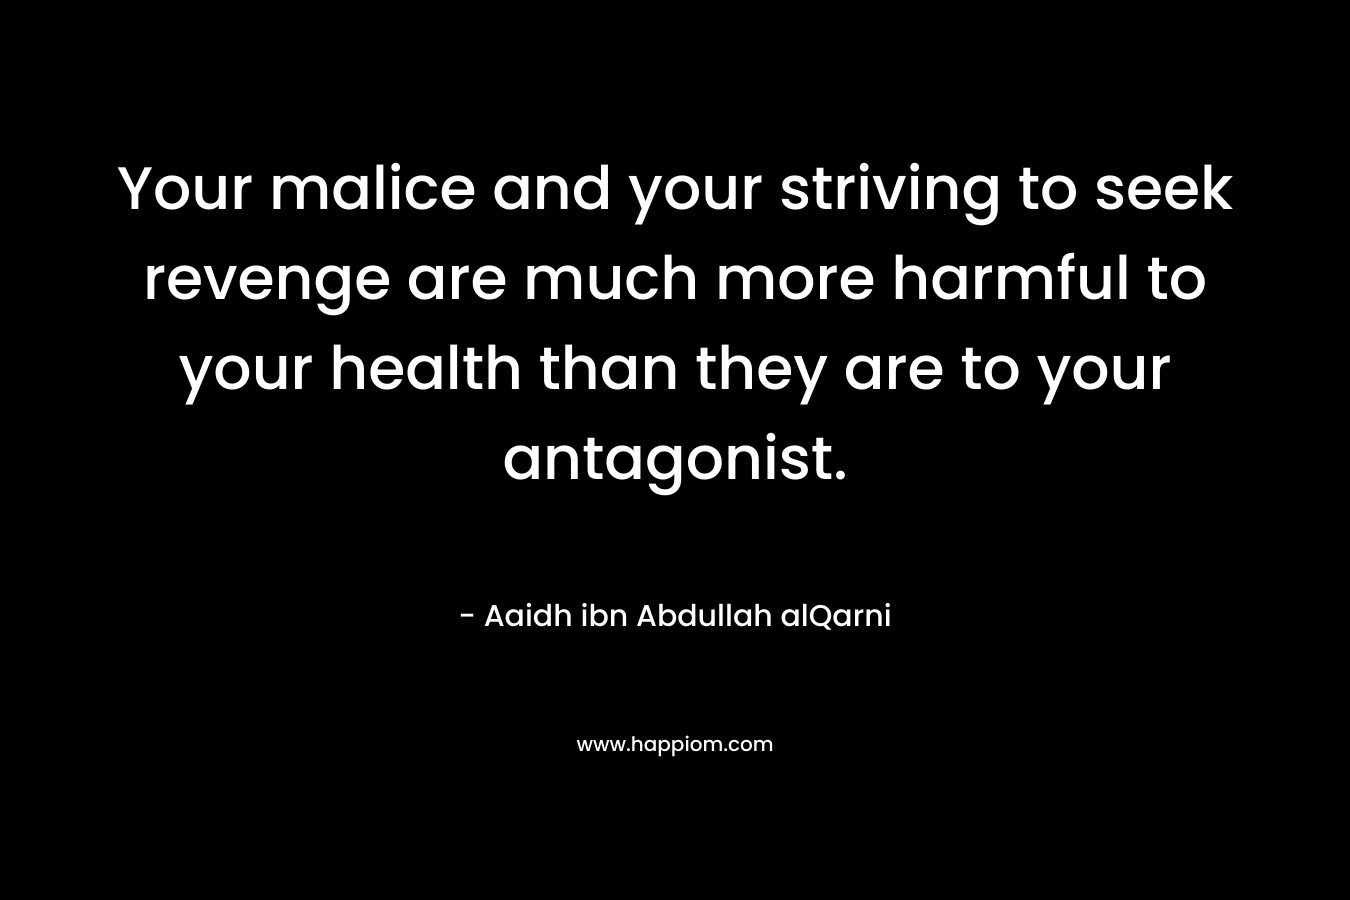 Your malice and your striving to seek revenge are much more harmful to your health than they are to your antagonist. – Aaidh ibn Abdullah alQarni